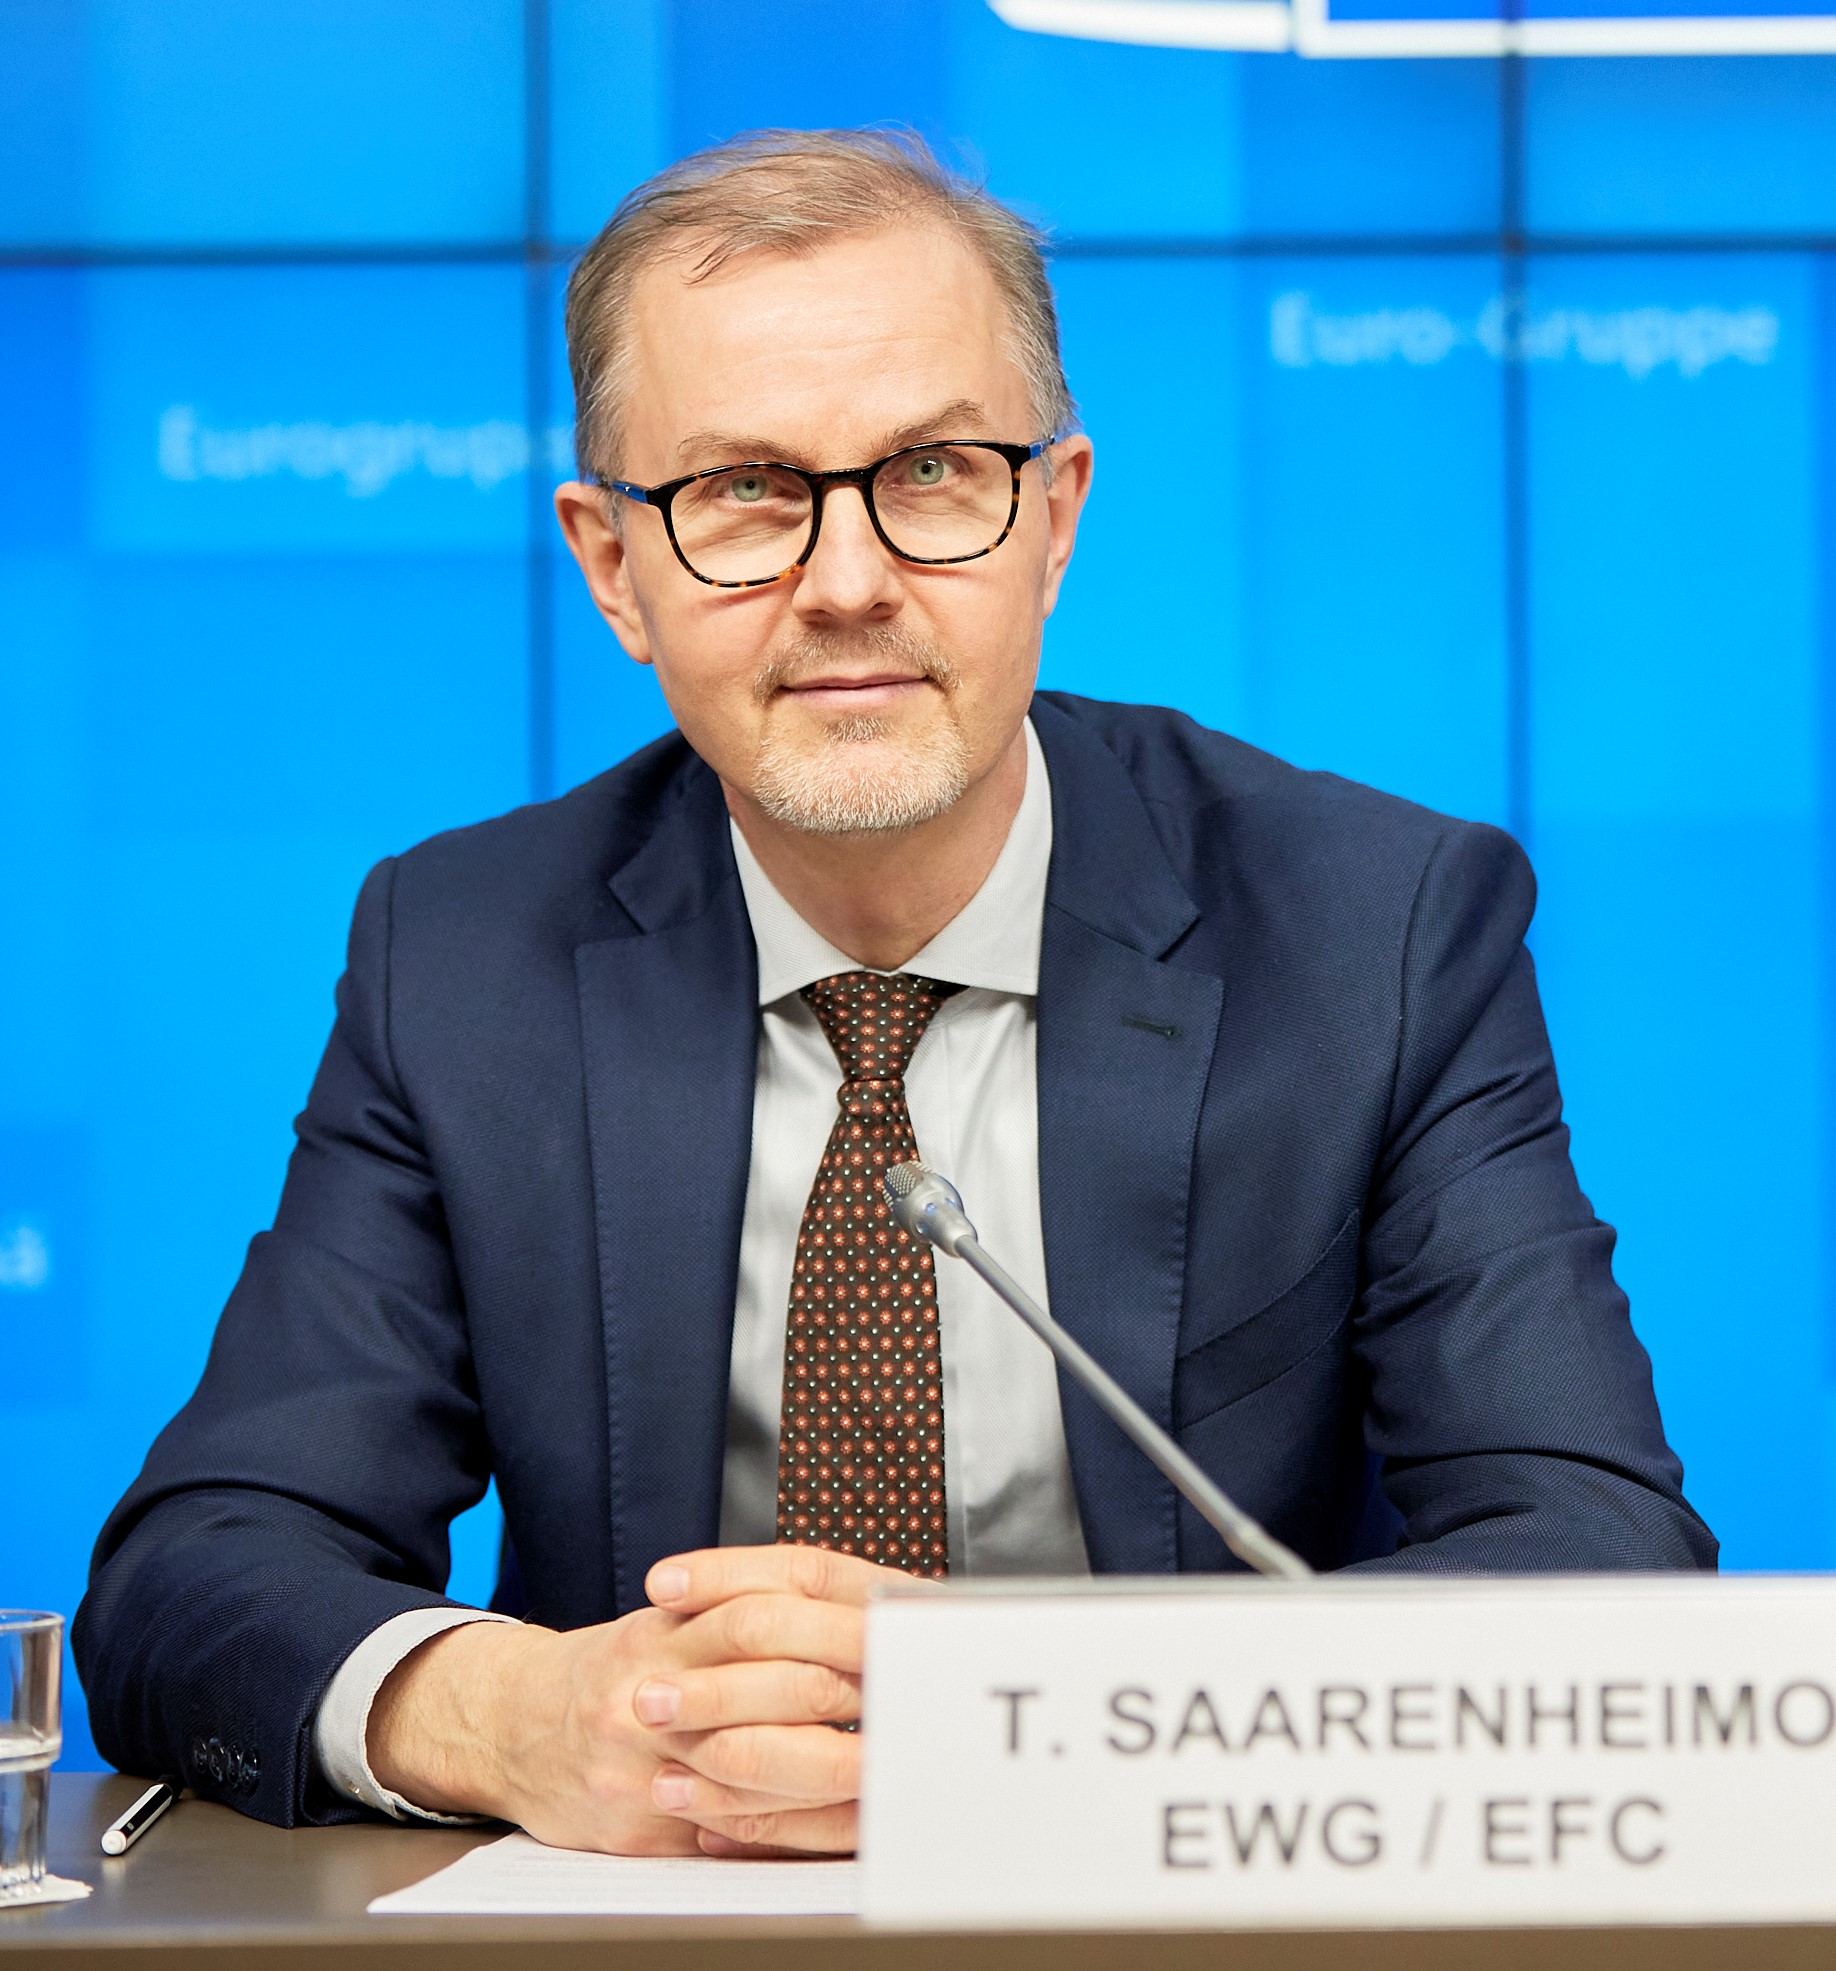 Tuomas Saarenheimo, reappointed as President of the Eurogroup Working Group